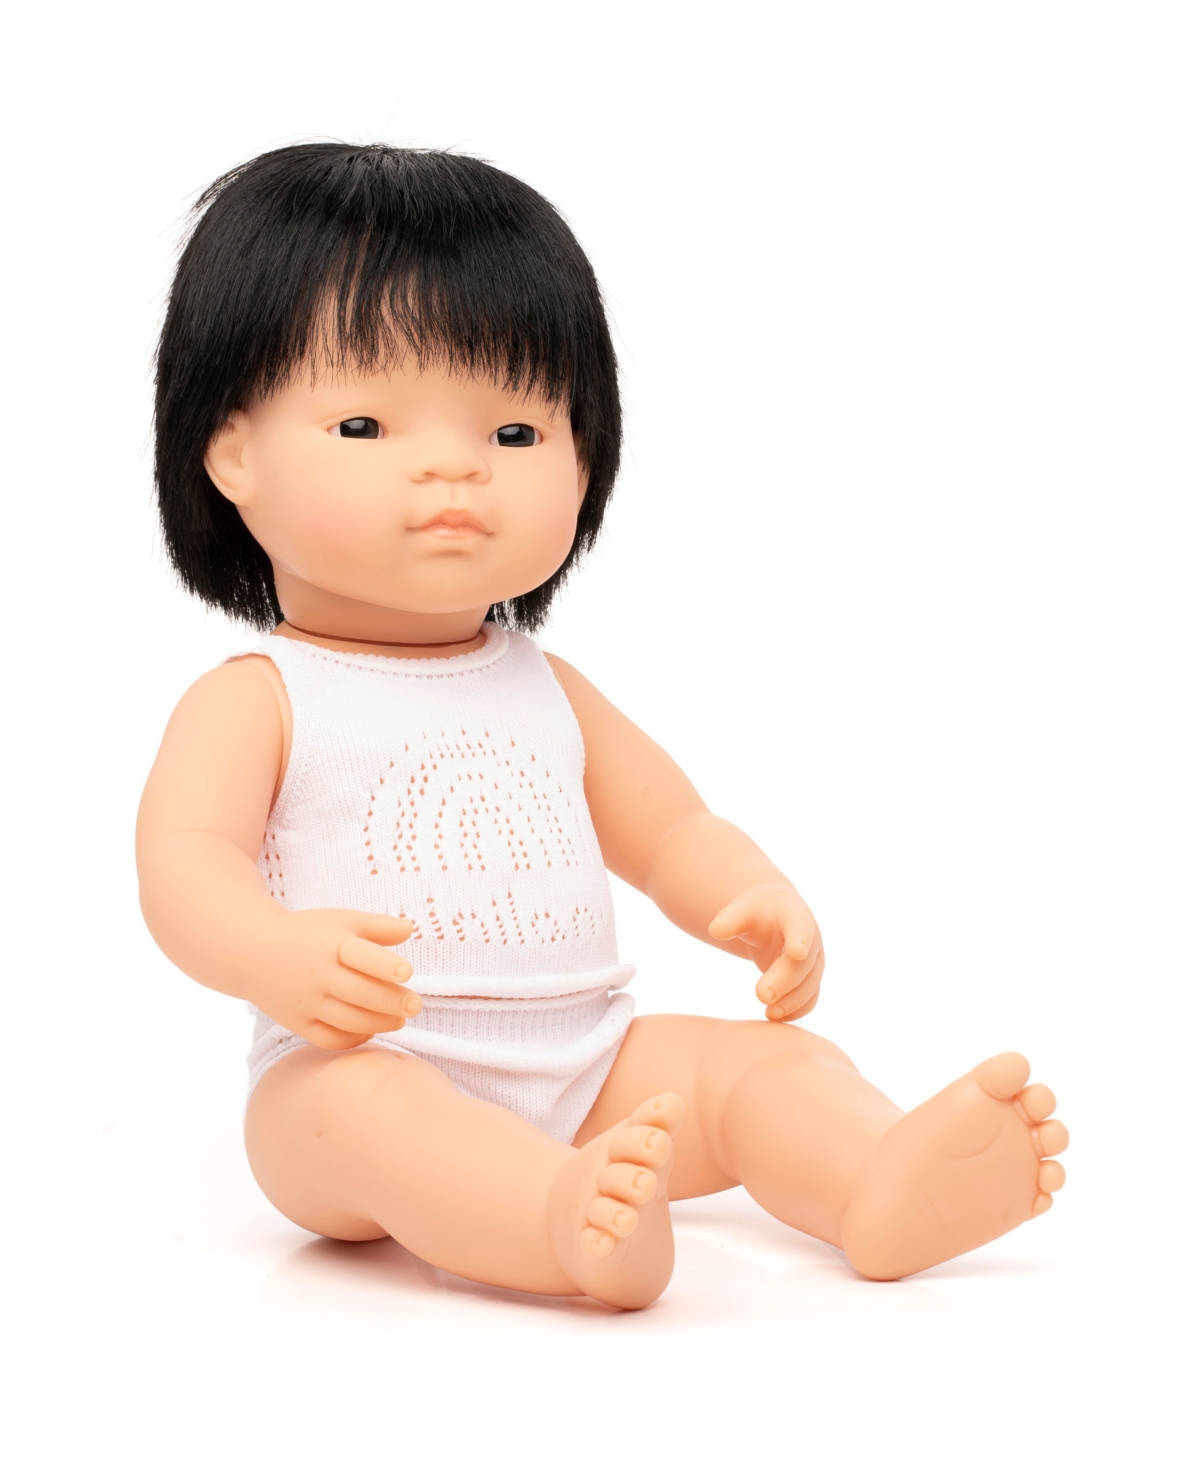 Miniland Kids' 15" Baby Doll Asian Boy Set, 3 Piece In No Color